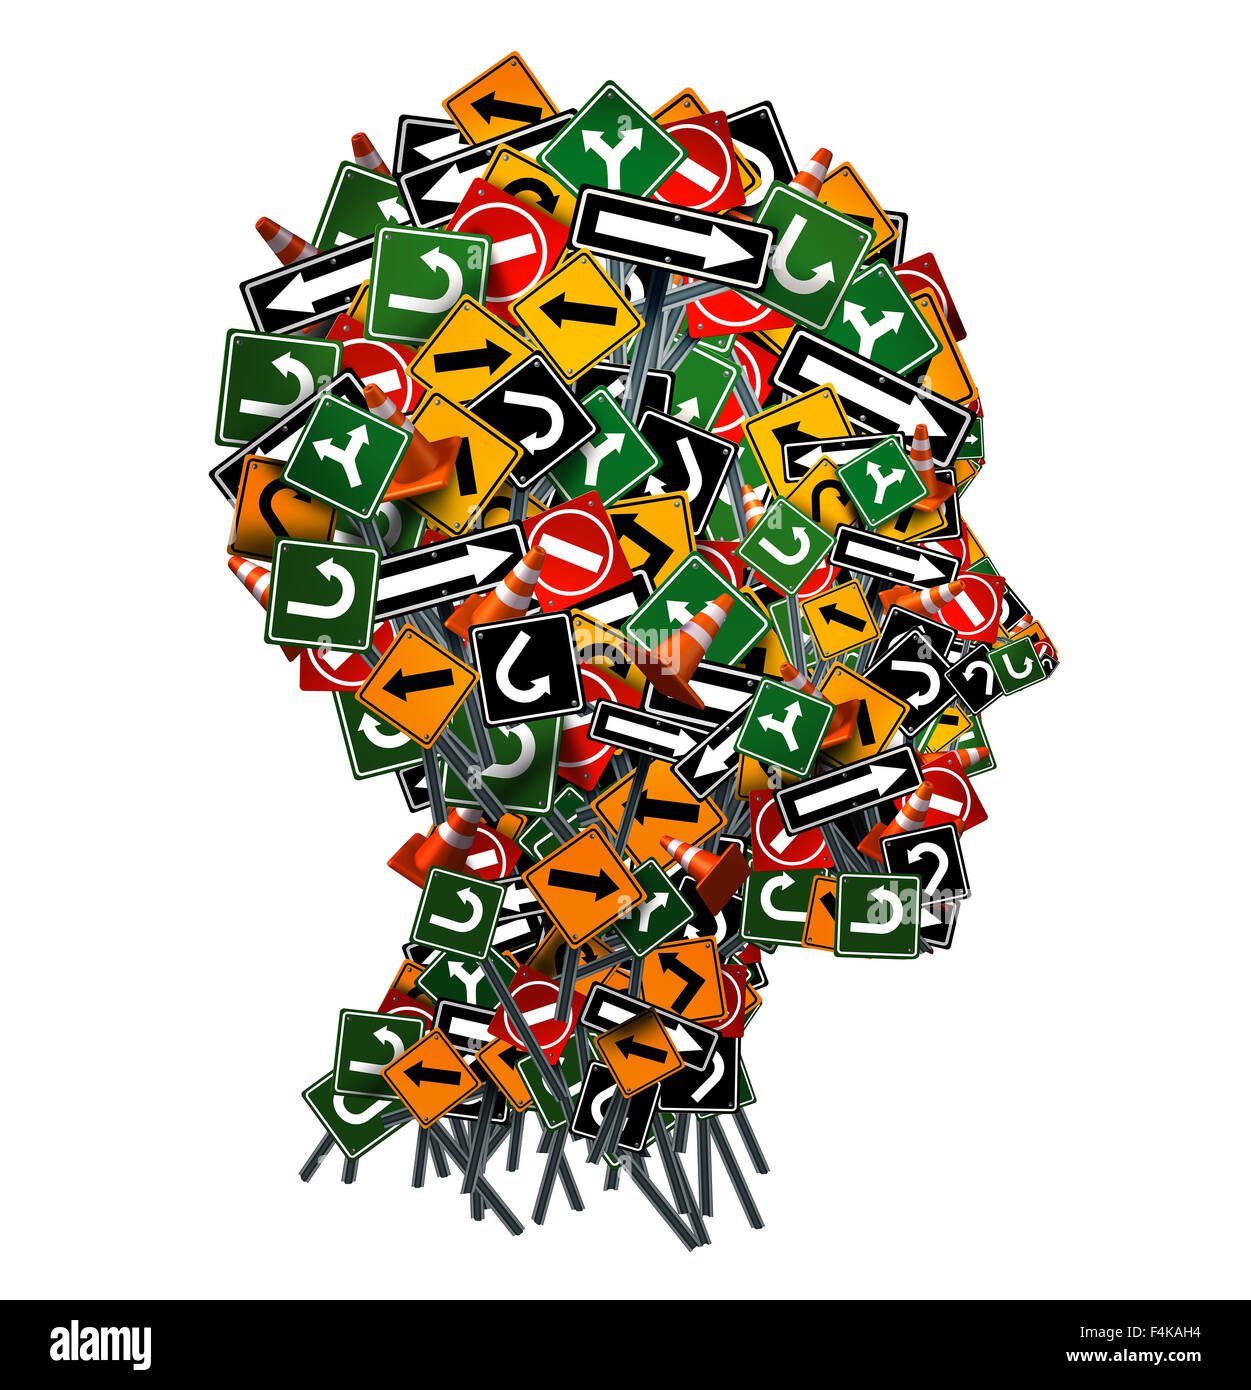 Confused thinking and uncertainty symbol as a group of traffic or road arrow signs shaped as a human head as a decision making crisis  or being lost in confusion concept on a white background. Stock Photo